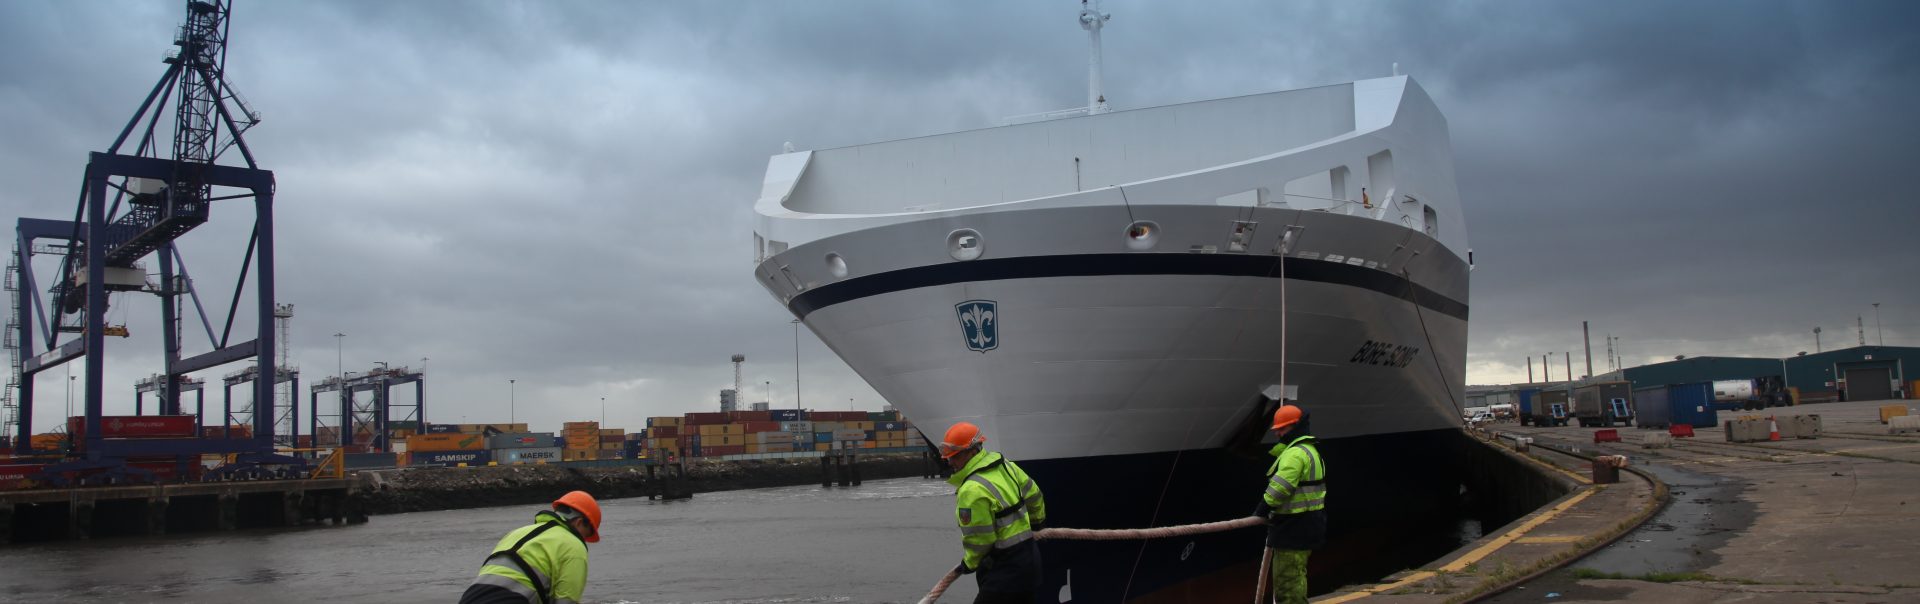 P&O Ferries’ Zeebrugge-Teesport route reports 16 percent freight increase, driven by connectivity to Northern cities